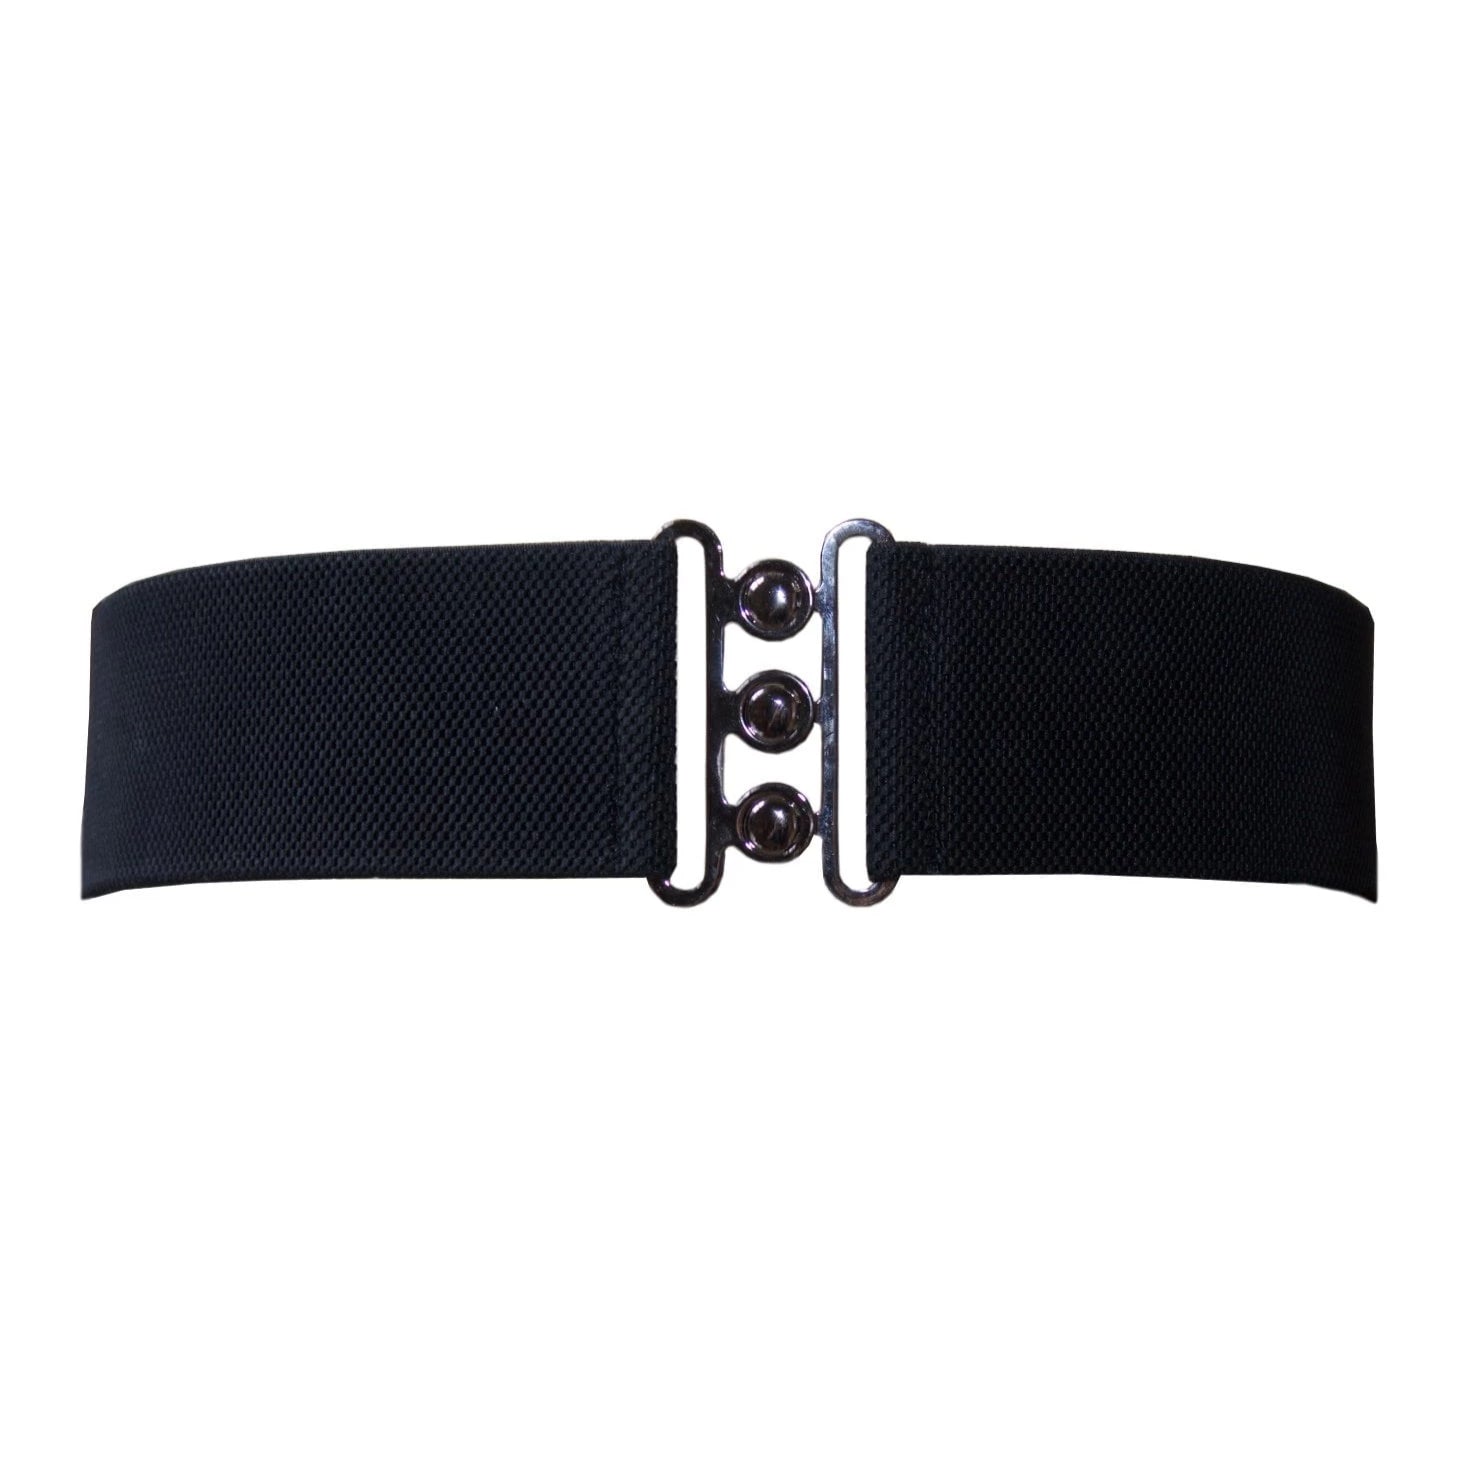 Collectif Accessories Nessa Cinch Belt stretchy belt that sits on the waist with a shiny clasp in colours black, red, green, giving an hour glass figure